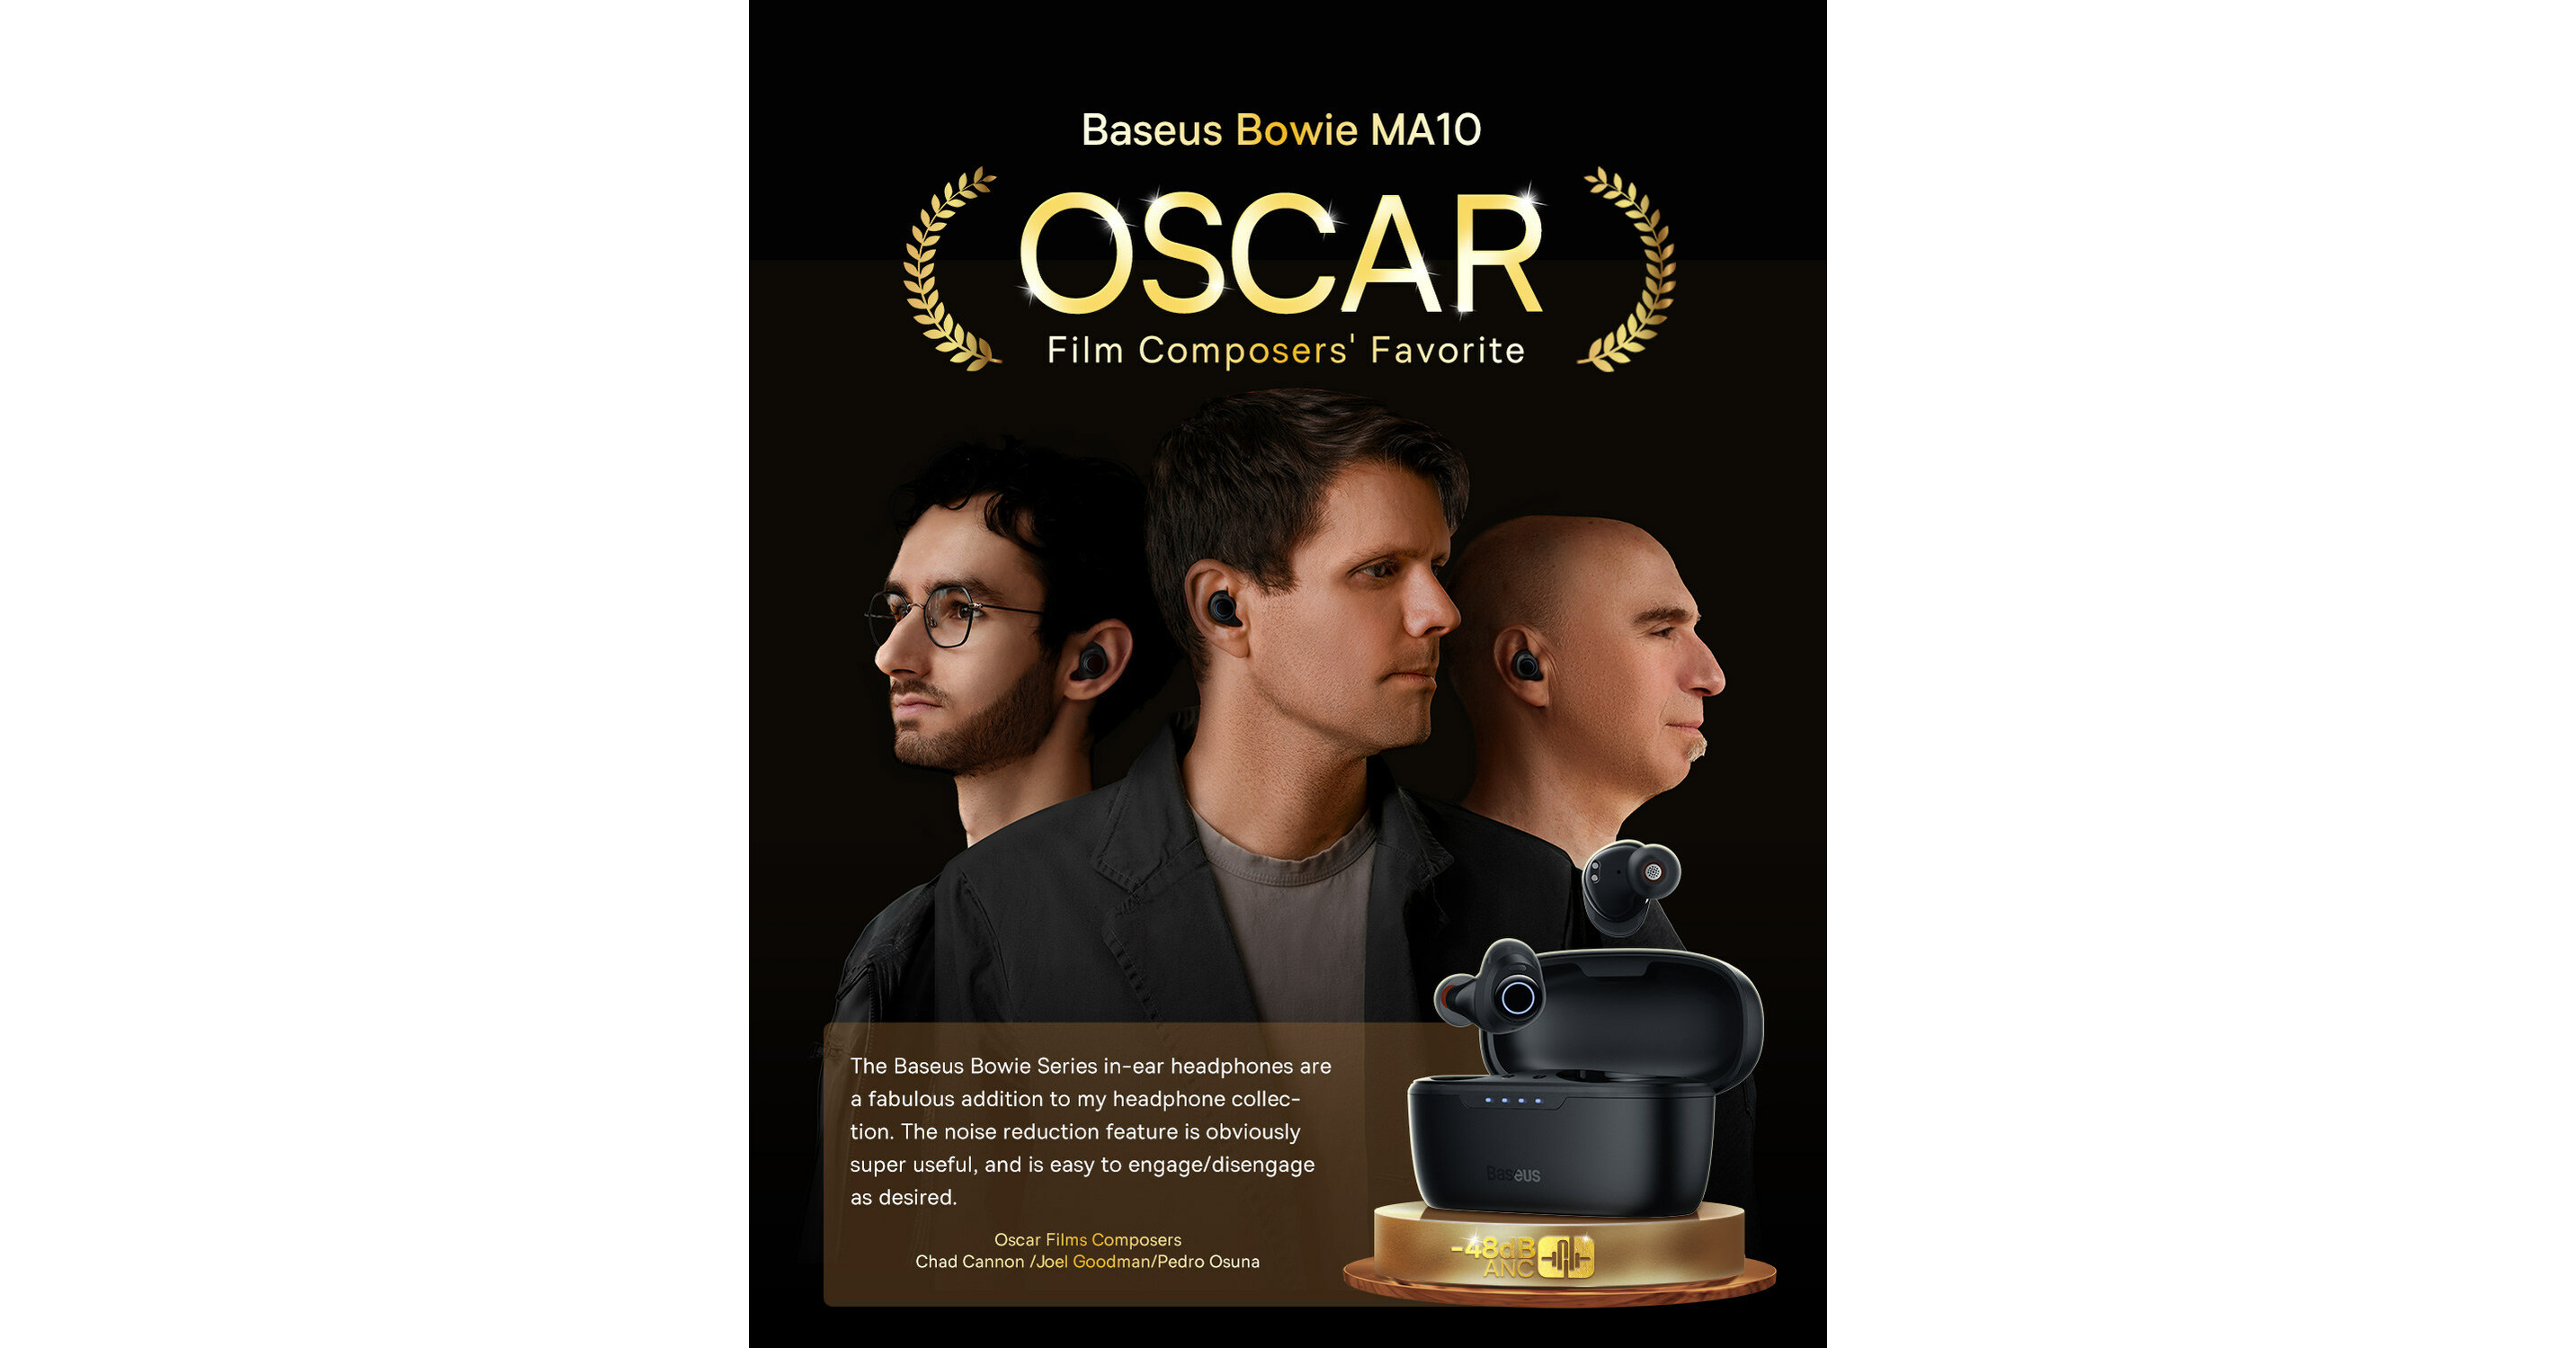 Baseus launched Bowie MA10 -- OSCAR Films Composers' Favorite Earbuds